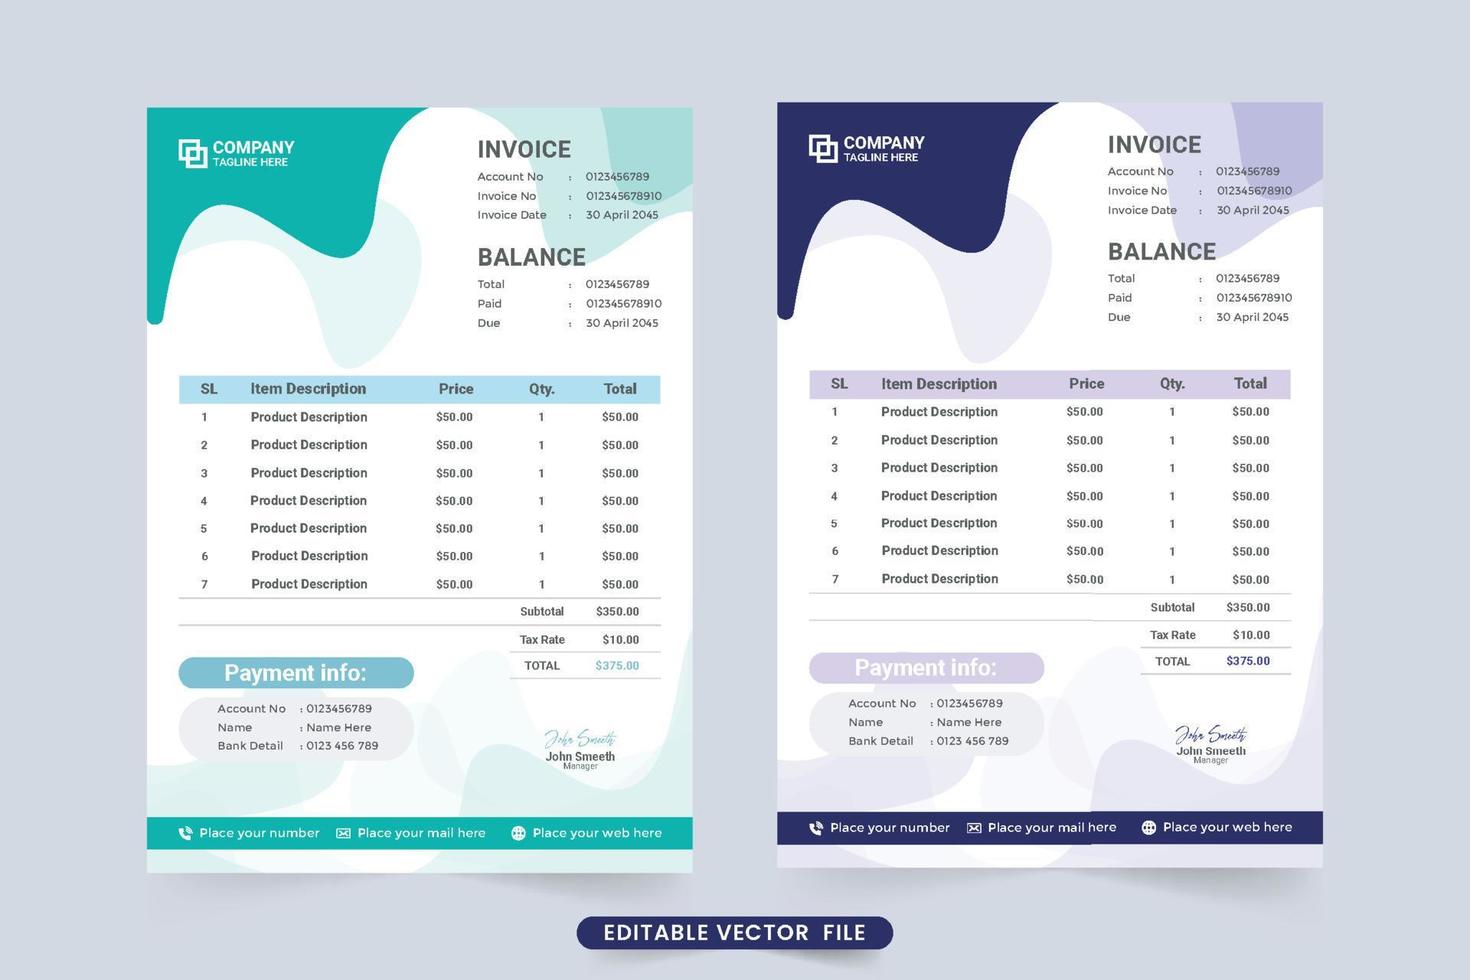 Company payment agreement and invoice bill template vector. Business payment information and price section design. Cash receipt and billing paper decoration vector with abstract shapes.